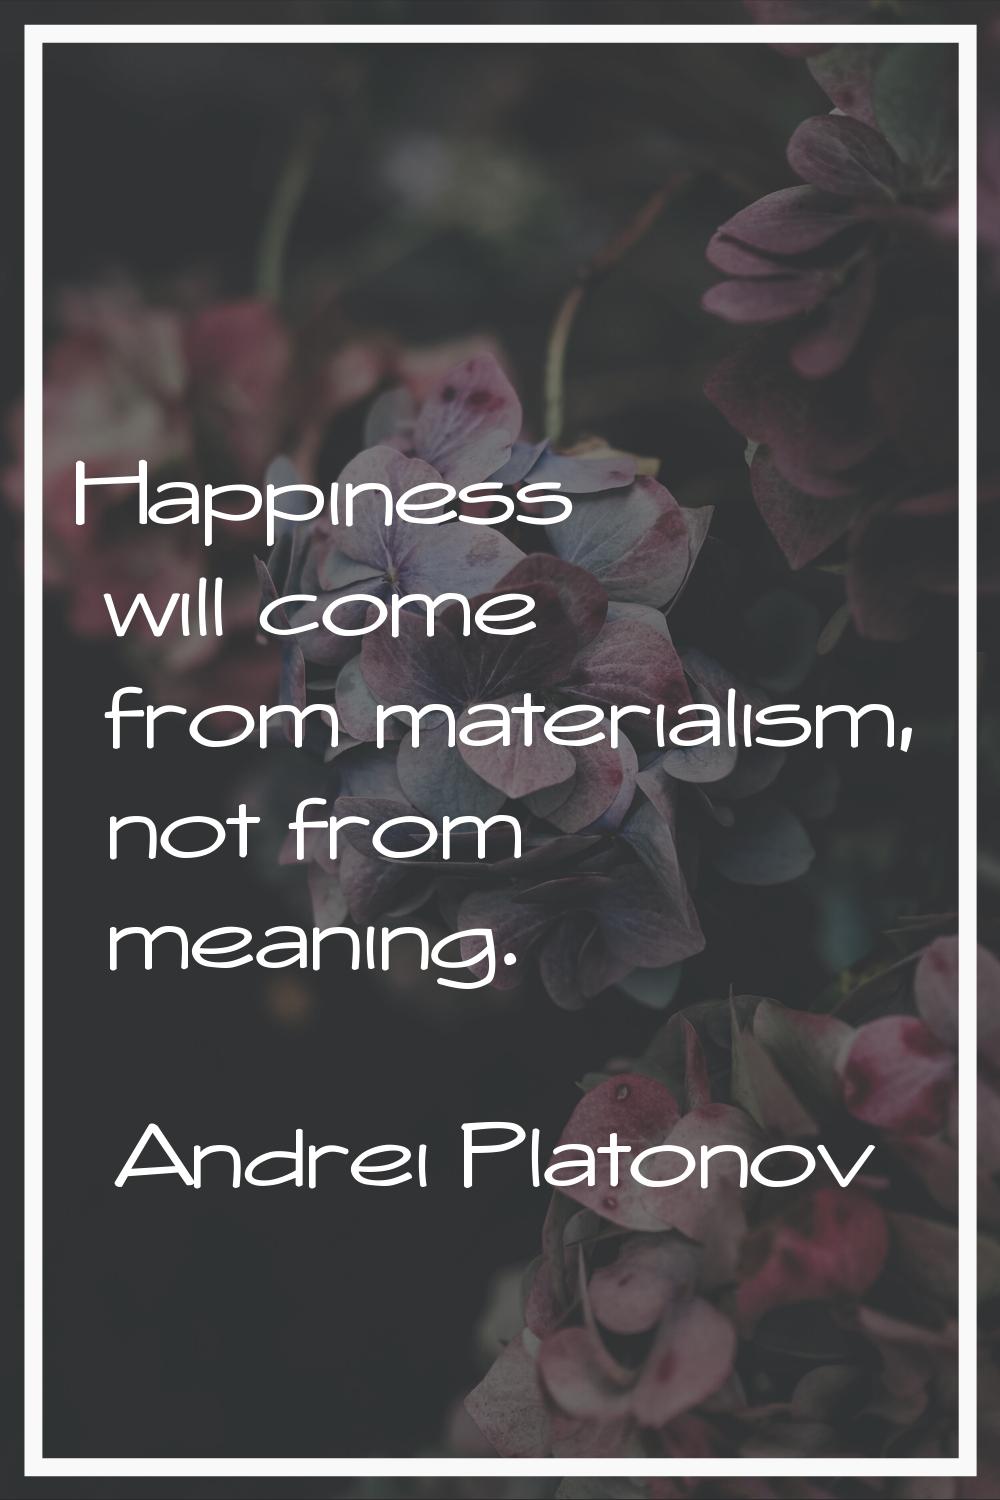 Happiness will come from materialism, not from meaning.